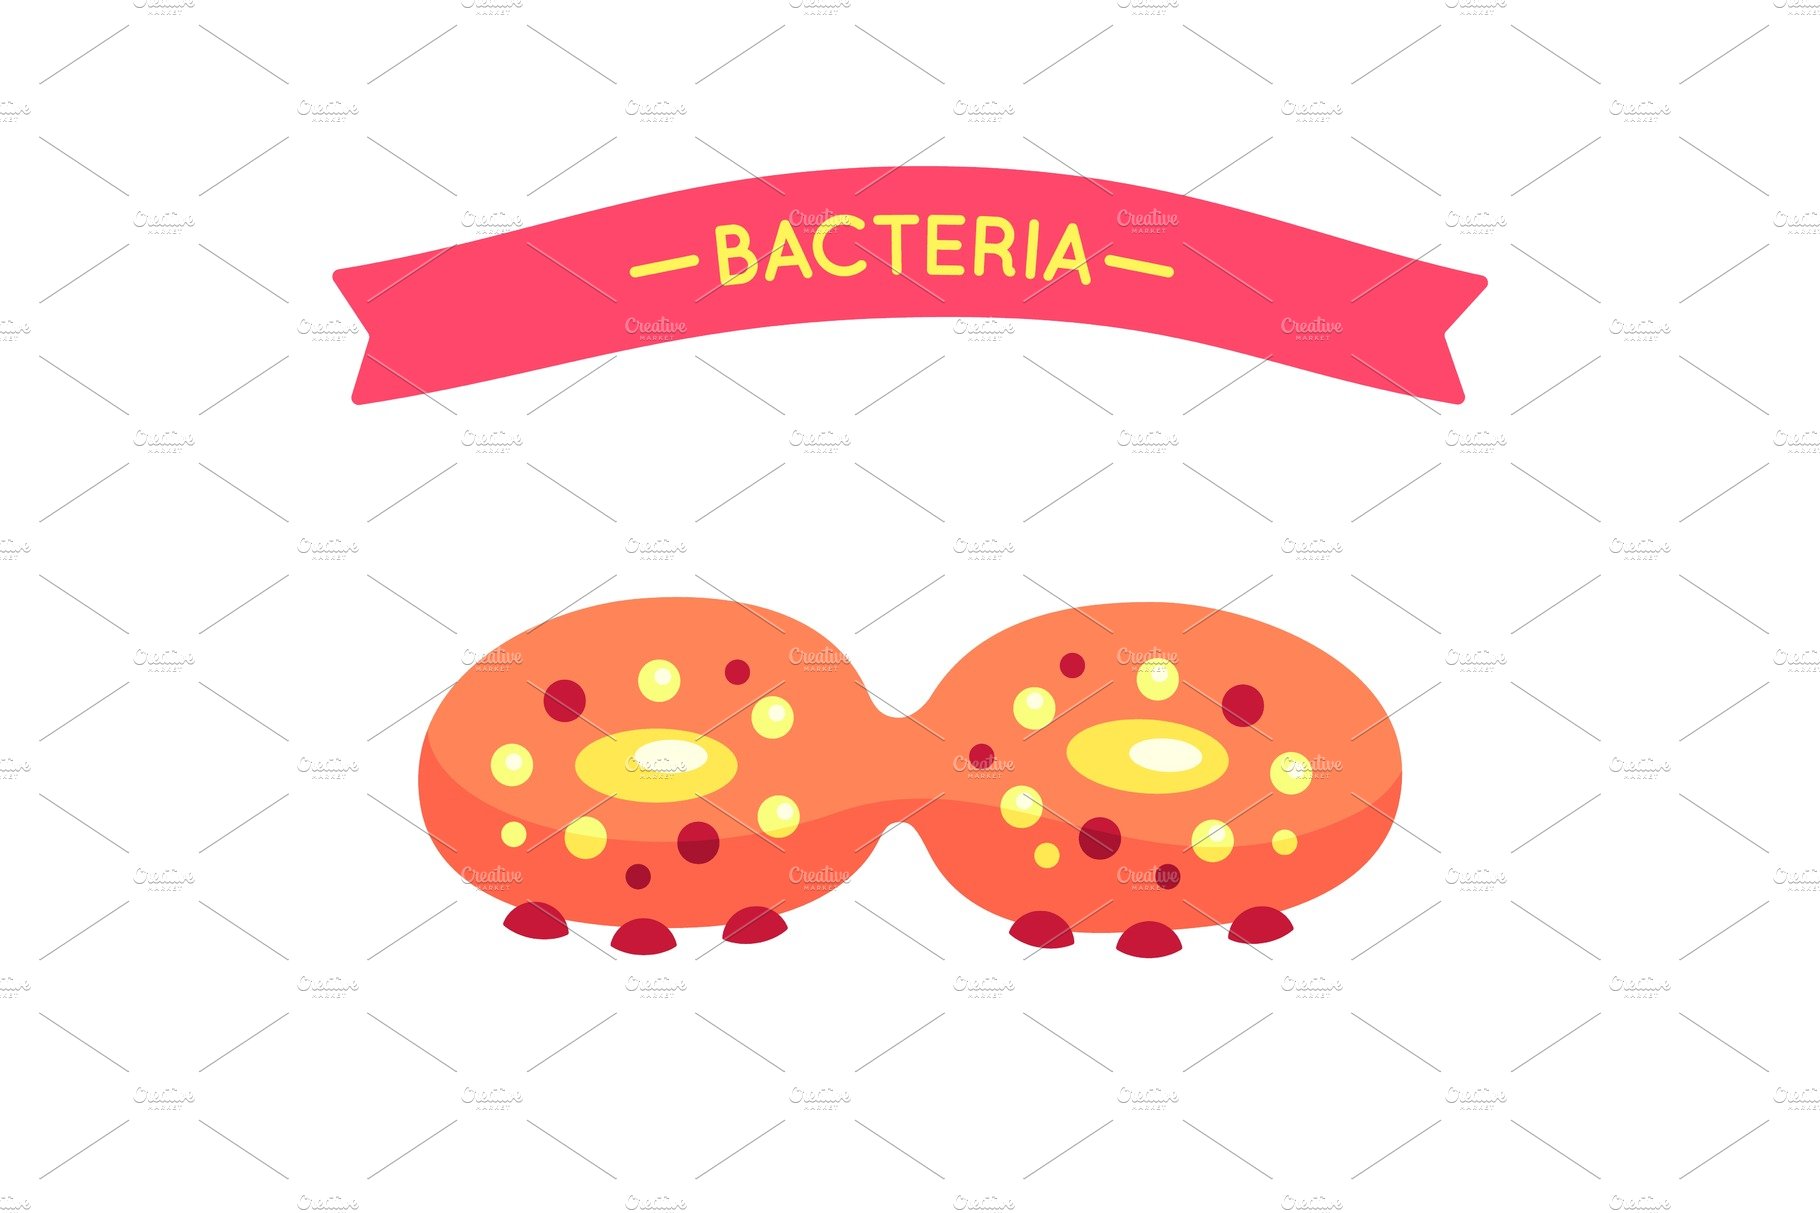 Bacteria Poster and Virus Vector cover image.